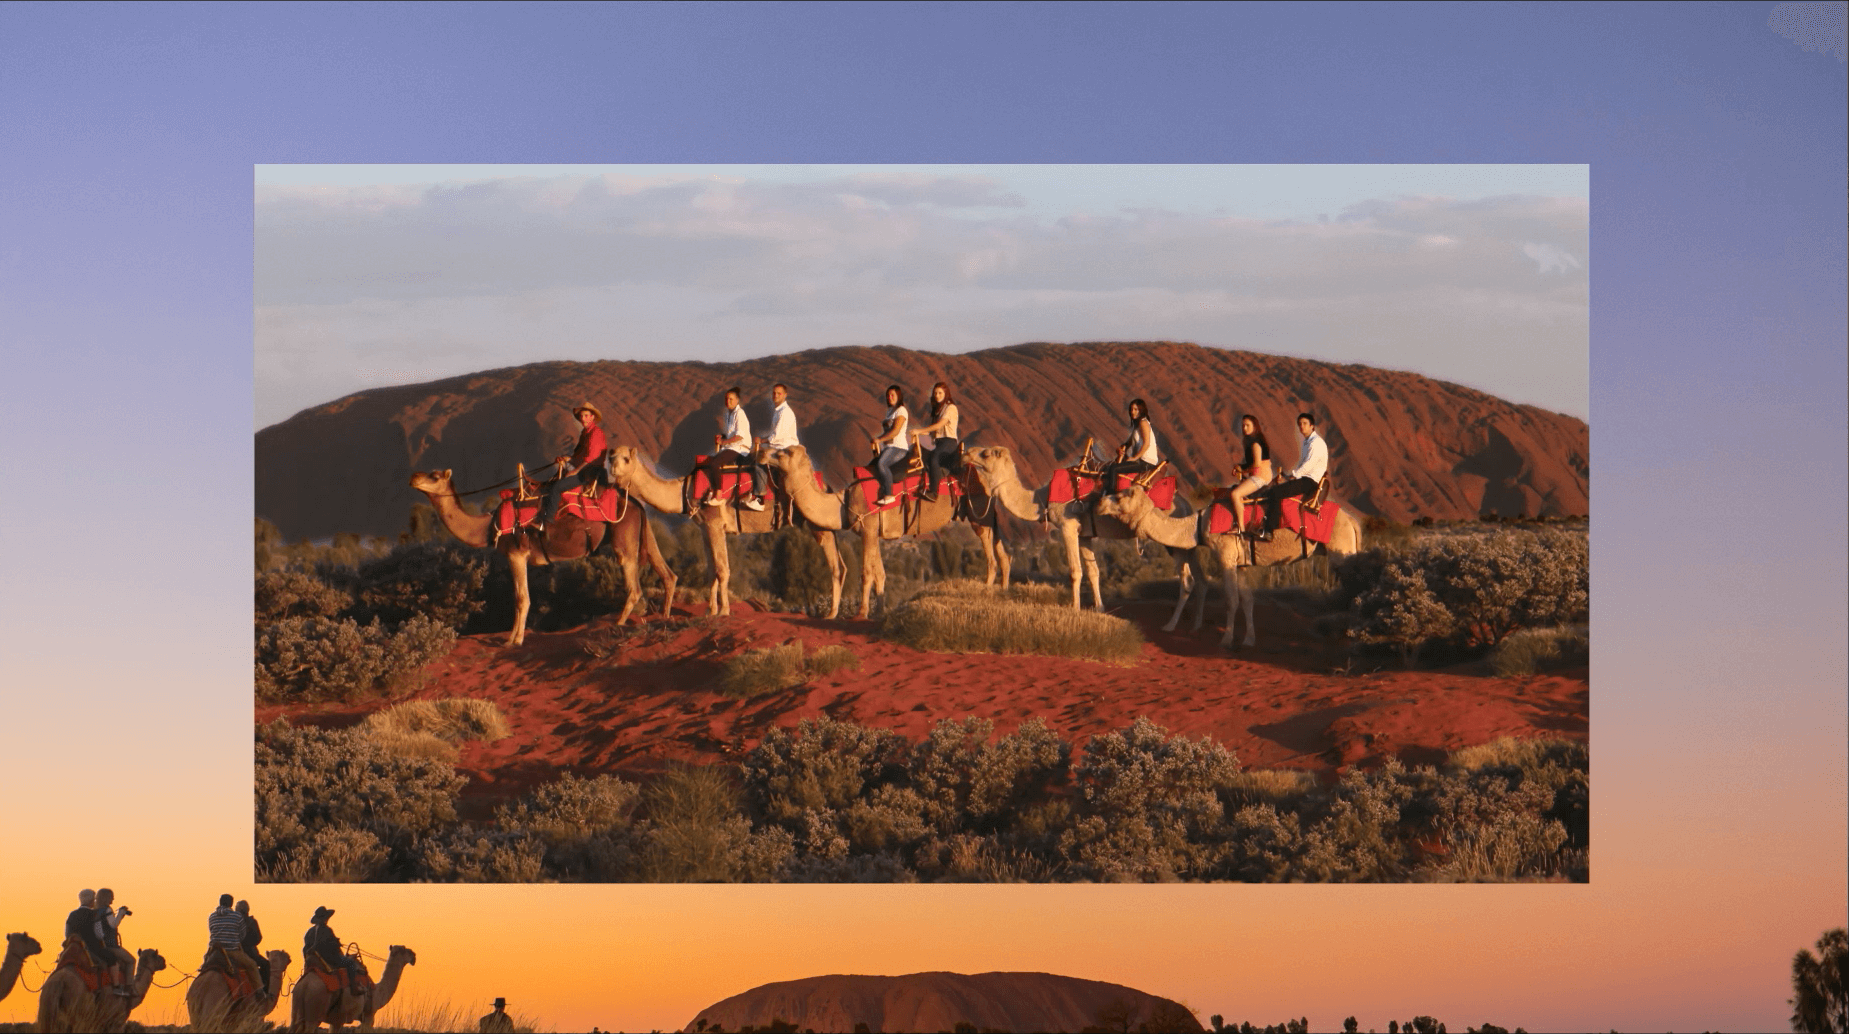 Voyages 'Just Wow' Uluru Ayers Rock Resort campaign featuring people riding camels in front of Uluru